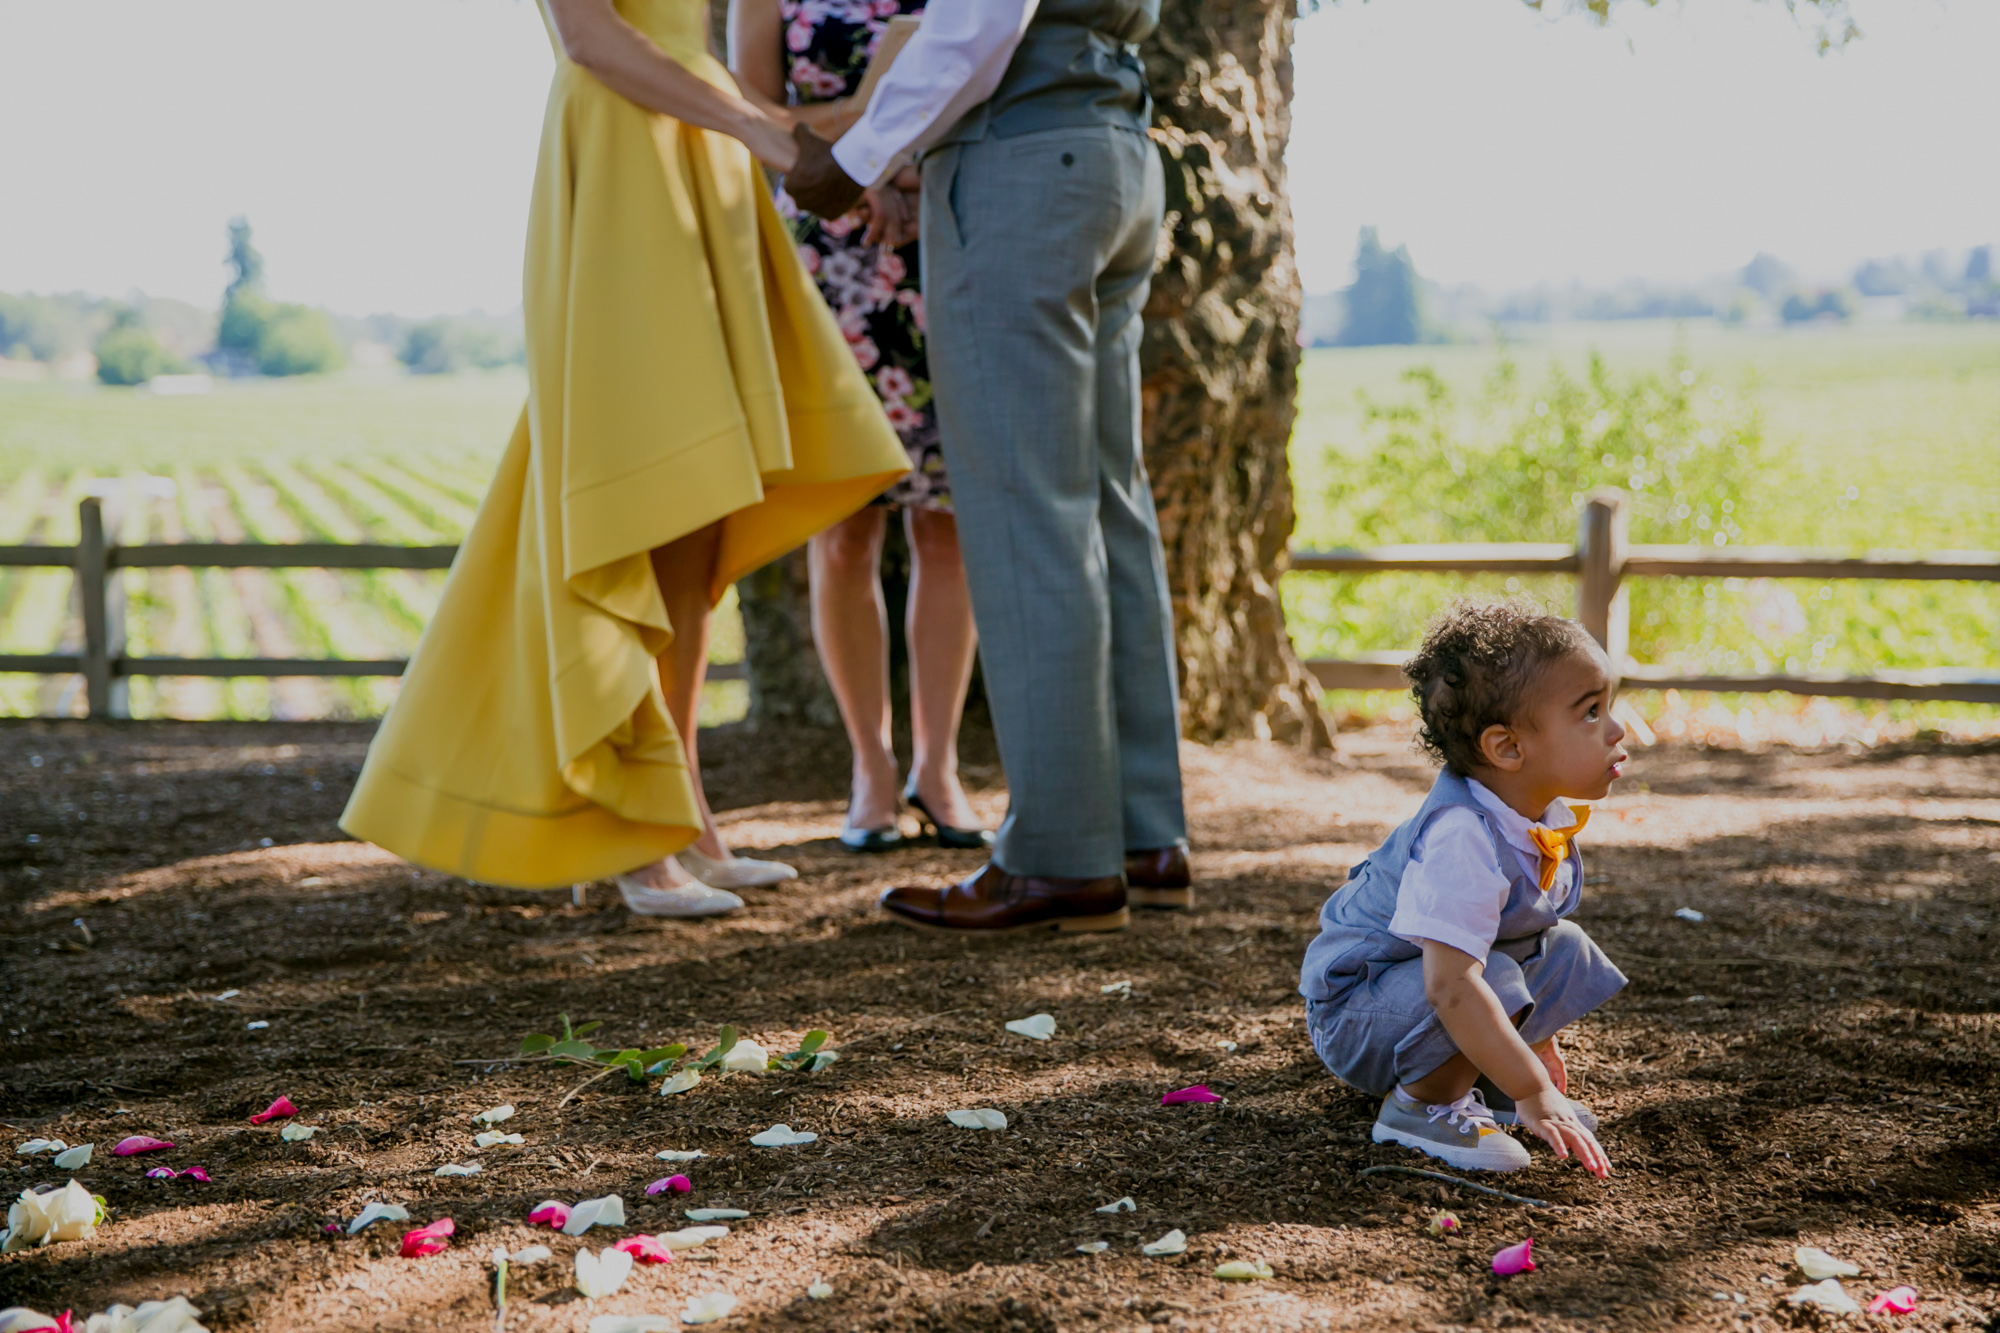 A child plays on the ground during a wedding ceremony.